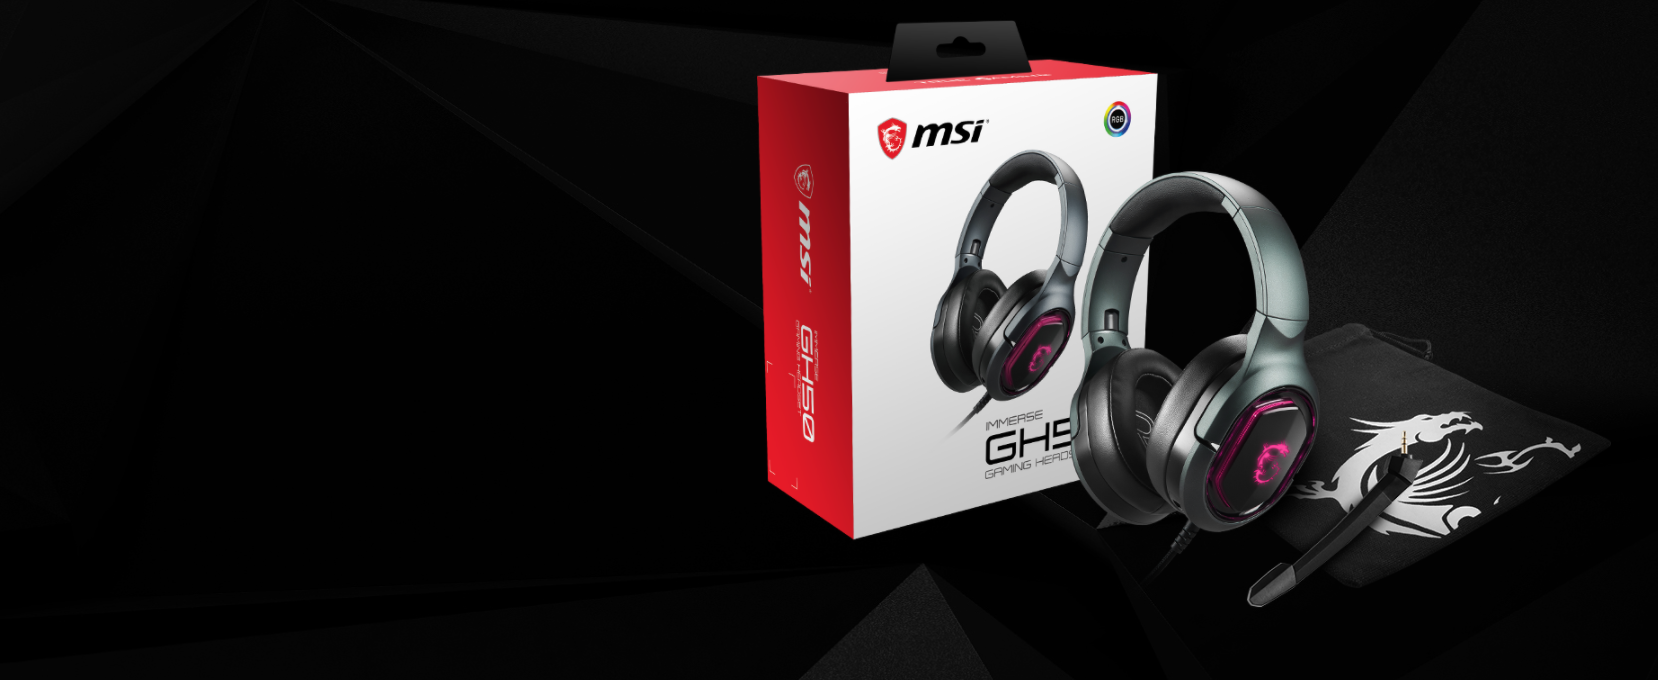 CASQUE-MICRO-PLIABLE-GAMING-MSI-IMMERSE-GH50-1